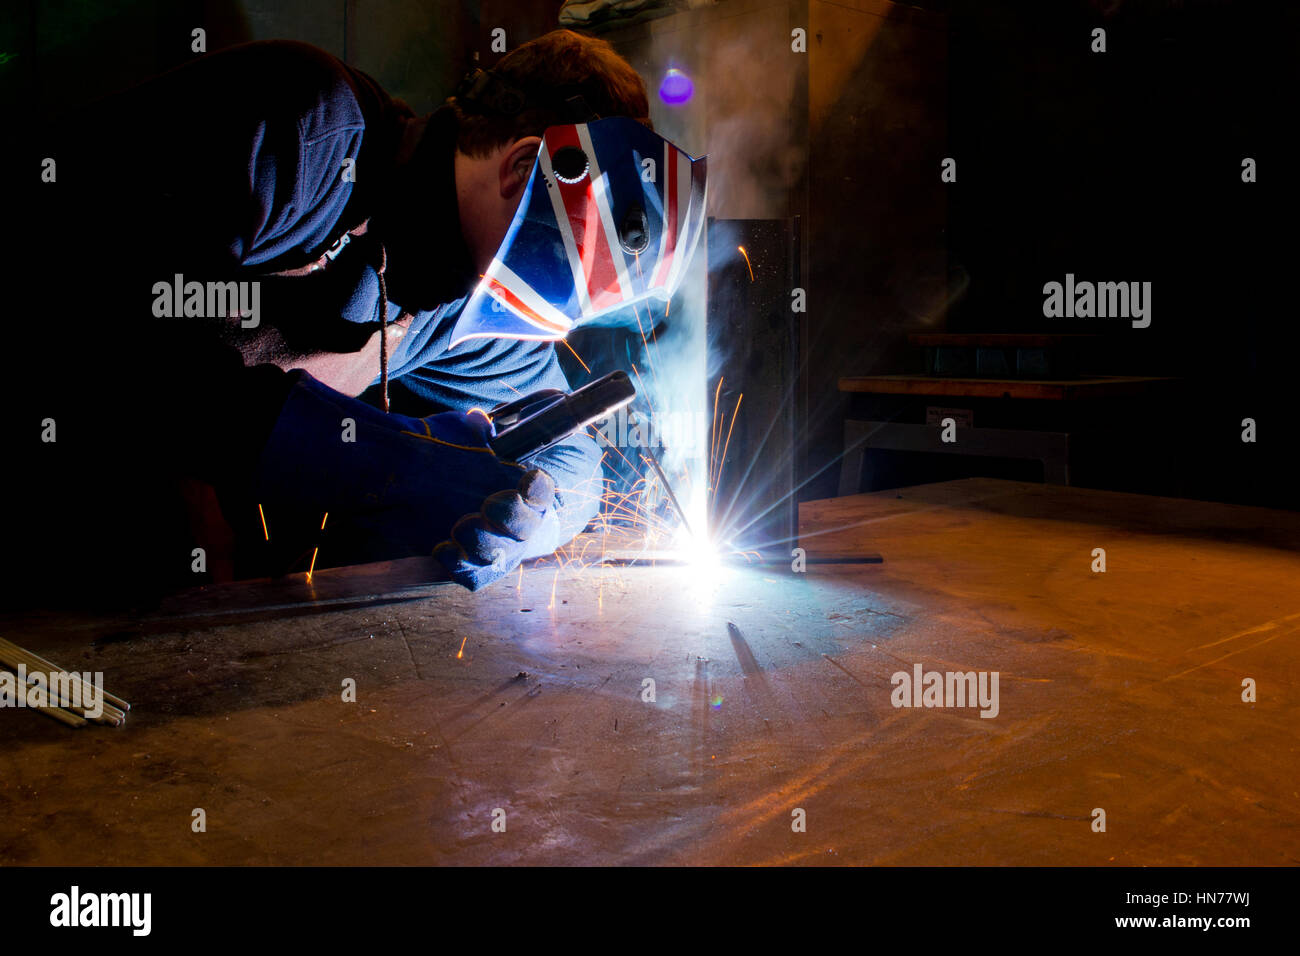 Welder Man mig process welding in protective workwear with safety mask Stock Photo